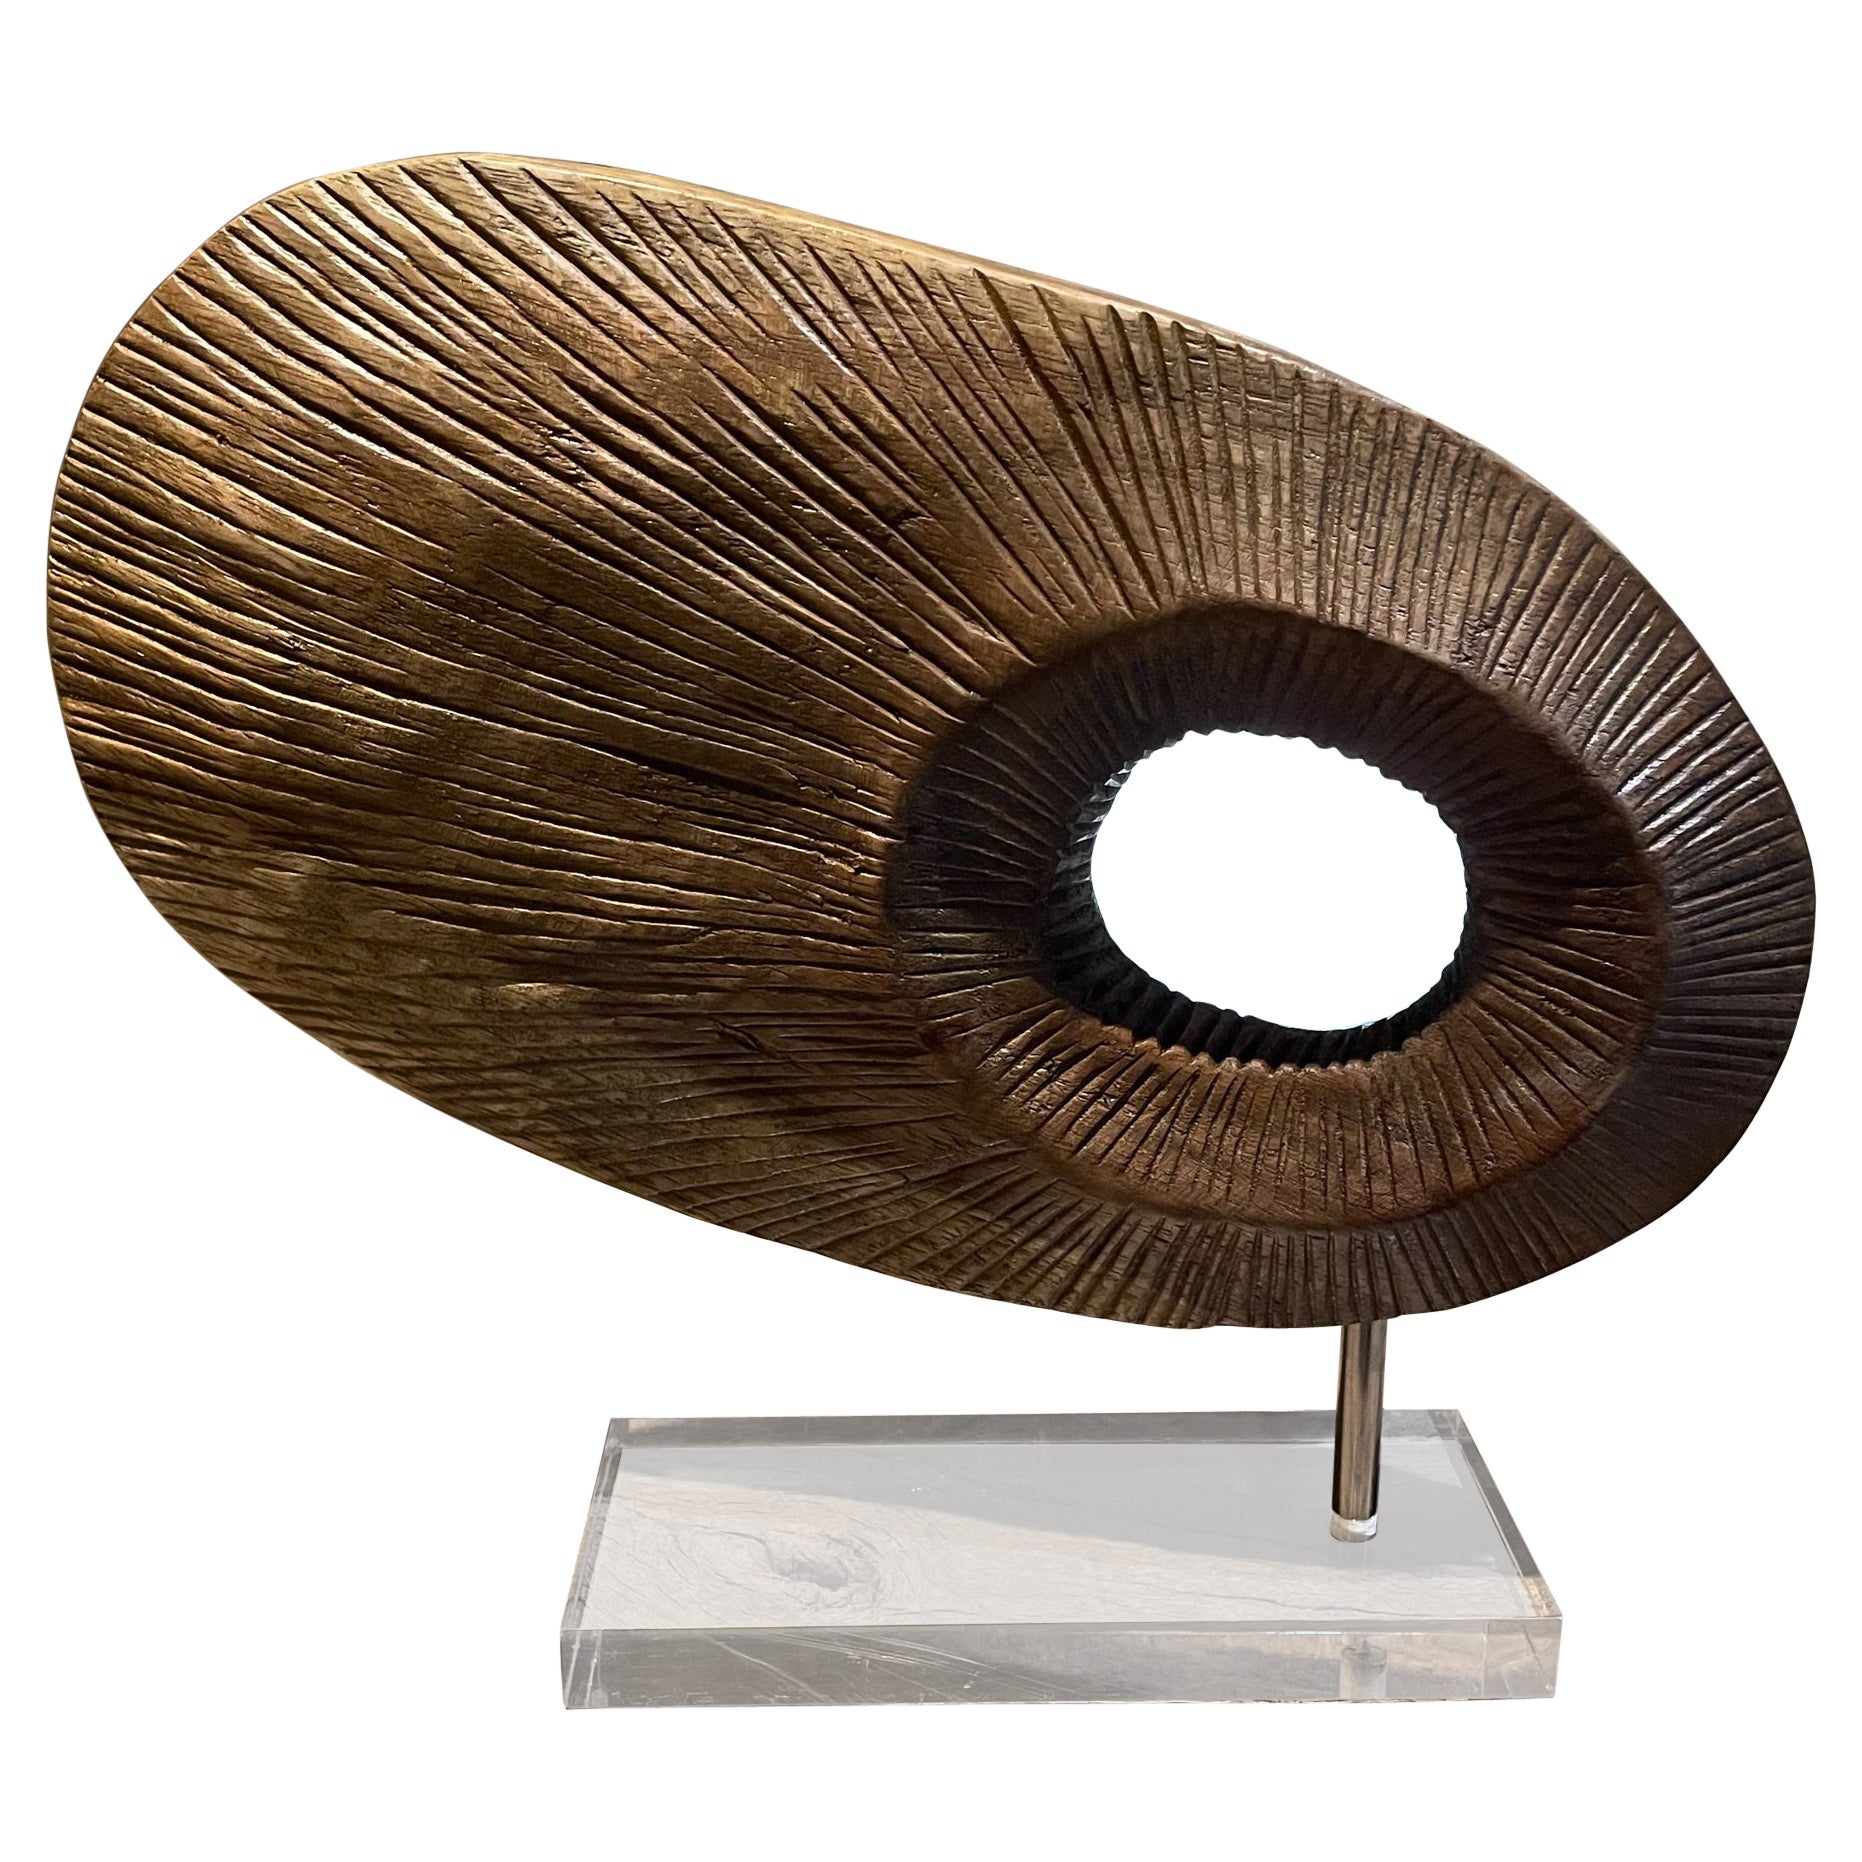 Modern Abstract Disc Sculpture Carved Wood on Lucite Base 1970s Mexico City